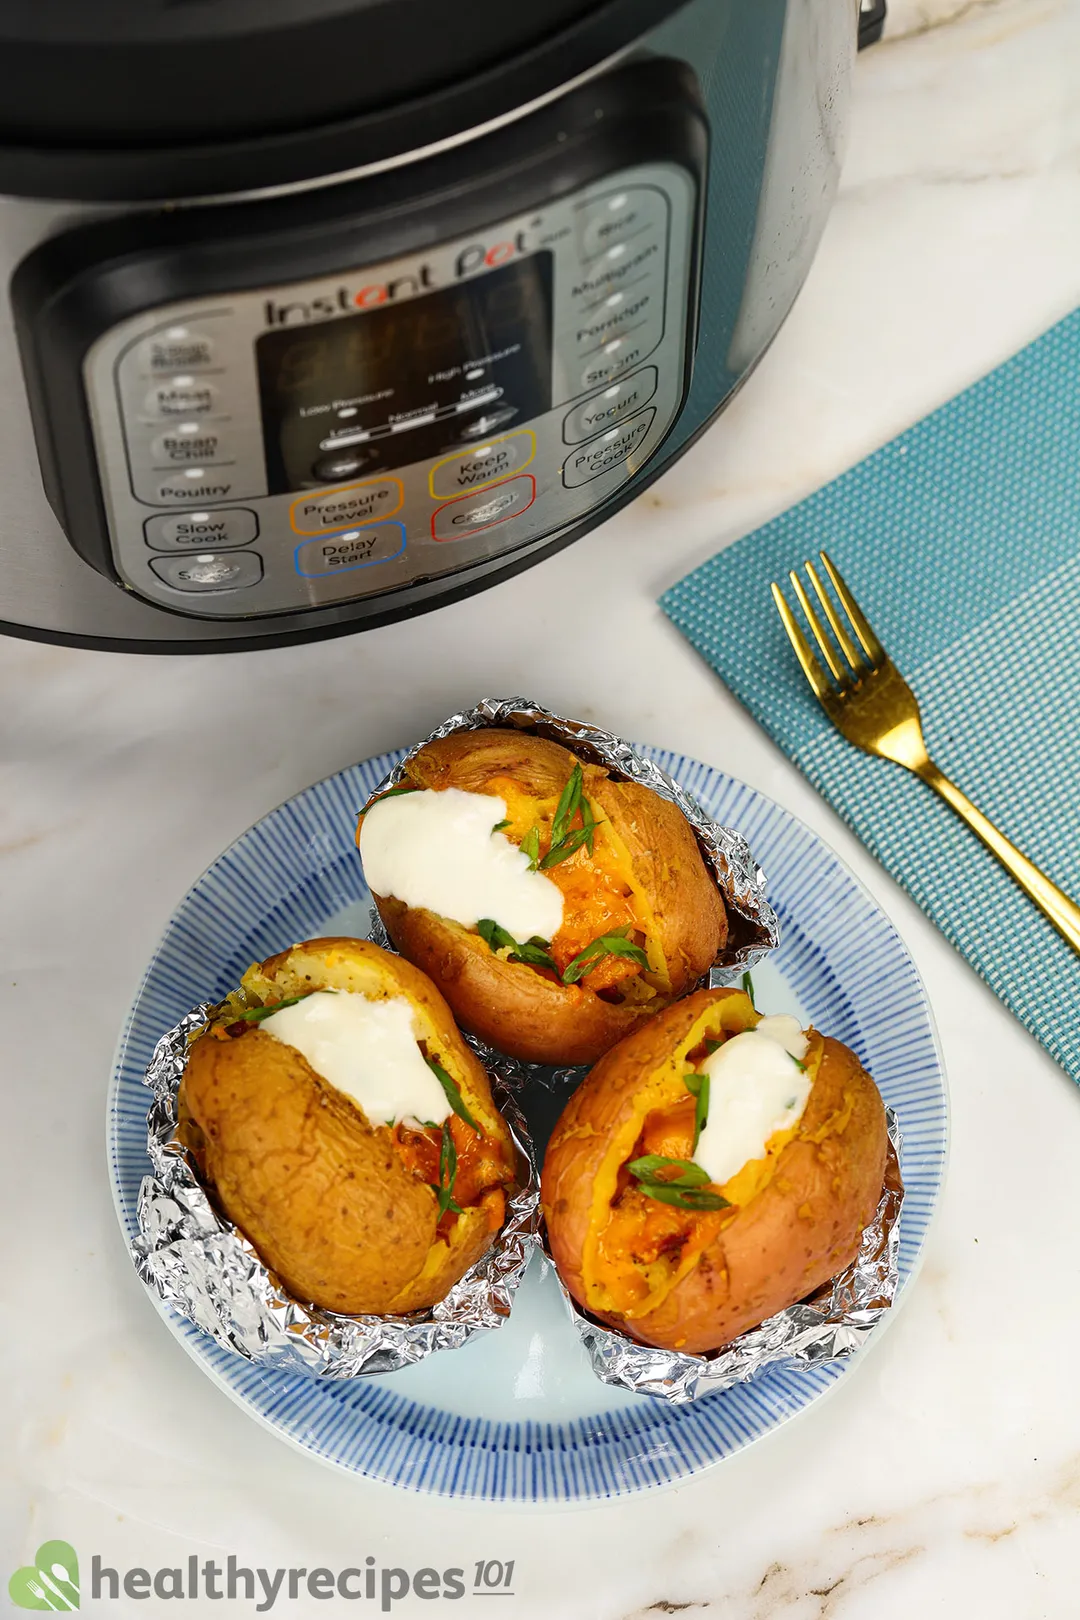 three baked potatoes on a plate next to an instant pot